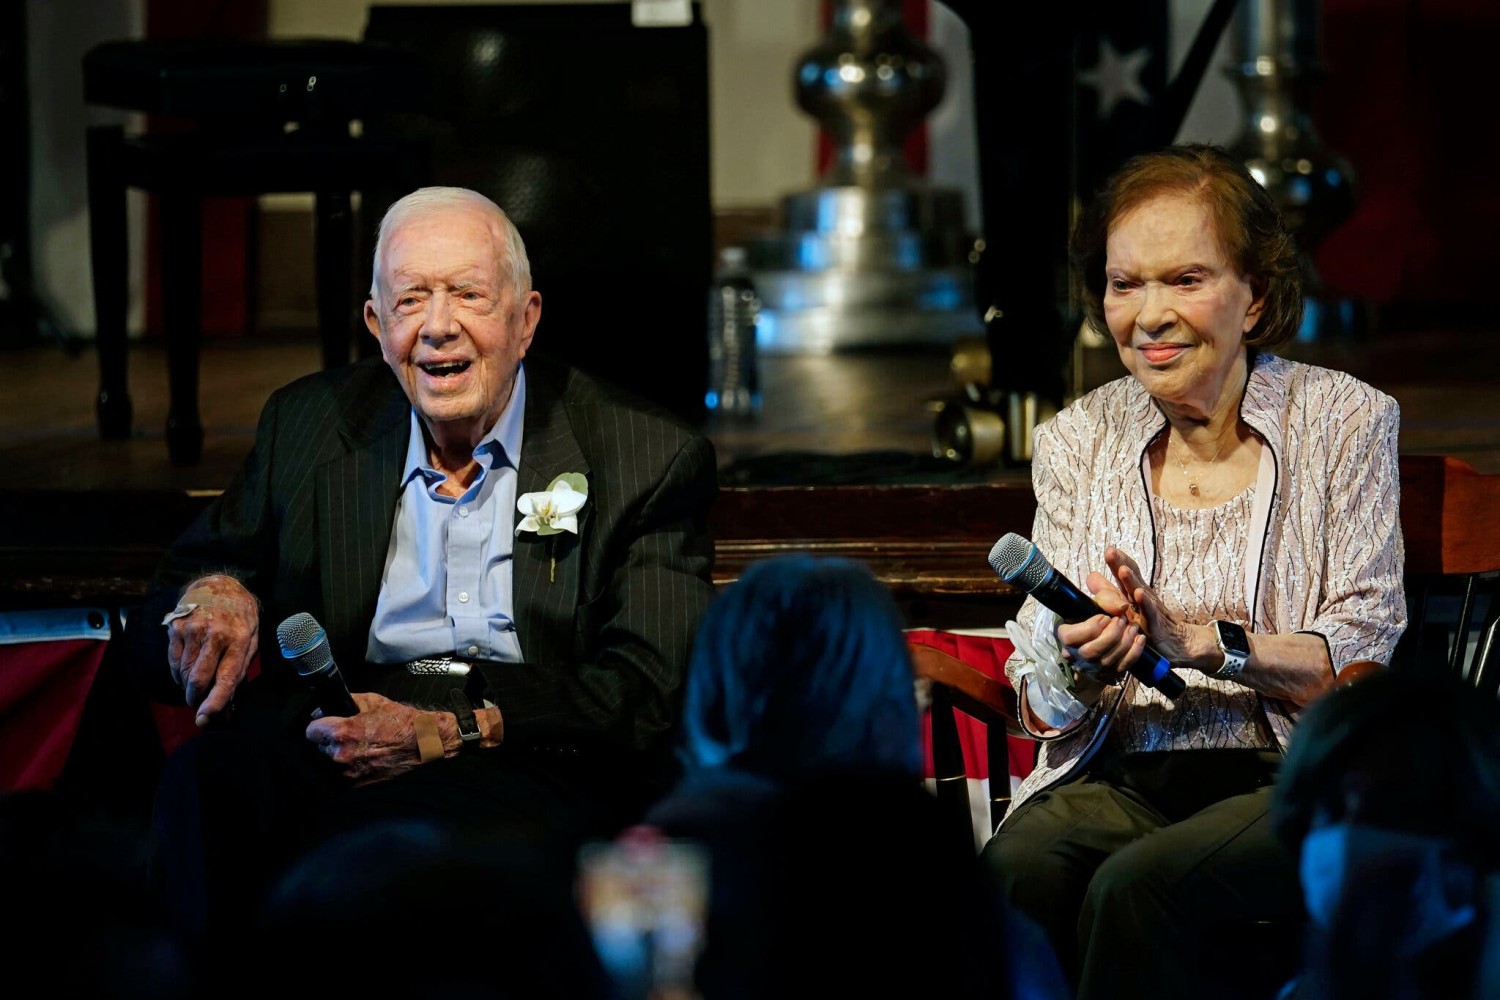 Jimmy and Rosalynn Carter during a reception to celebrate their 75th wedding anniversary in Plains, Ga., in 2021. “They still have a house full of love, and a house full of family,” their grandson Josh Carter said.Credit...Pool photo by John Bazemore